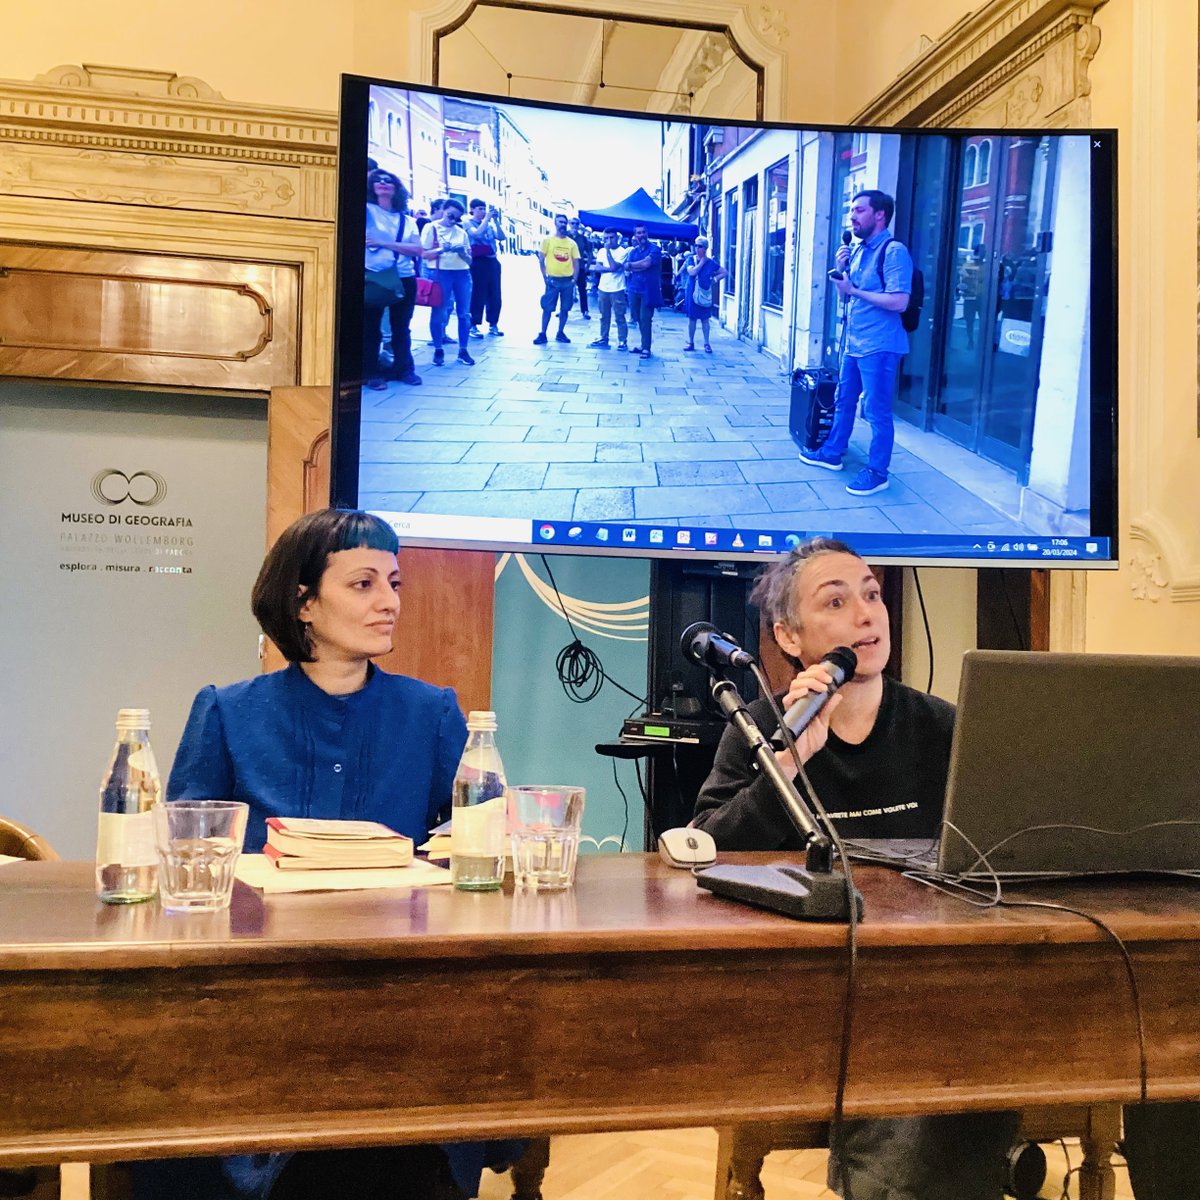 In the latest WALC PRIN seminar on urban walking as a practice of care and resistance in local activism, Beatrice Barzaghi and Maria Fiano brought us through Venice's memories of rebellion and the contemporary awareness-raising activities. A huge thanks to the speakers!